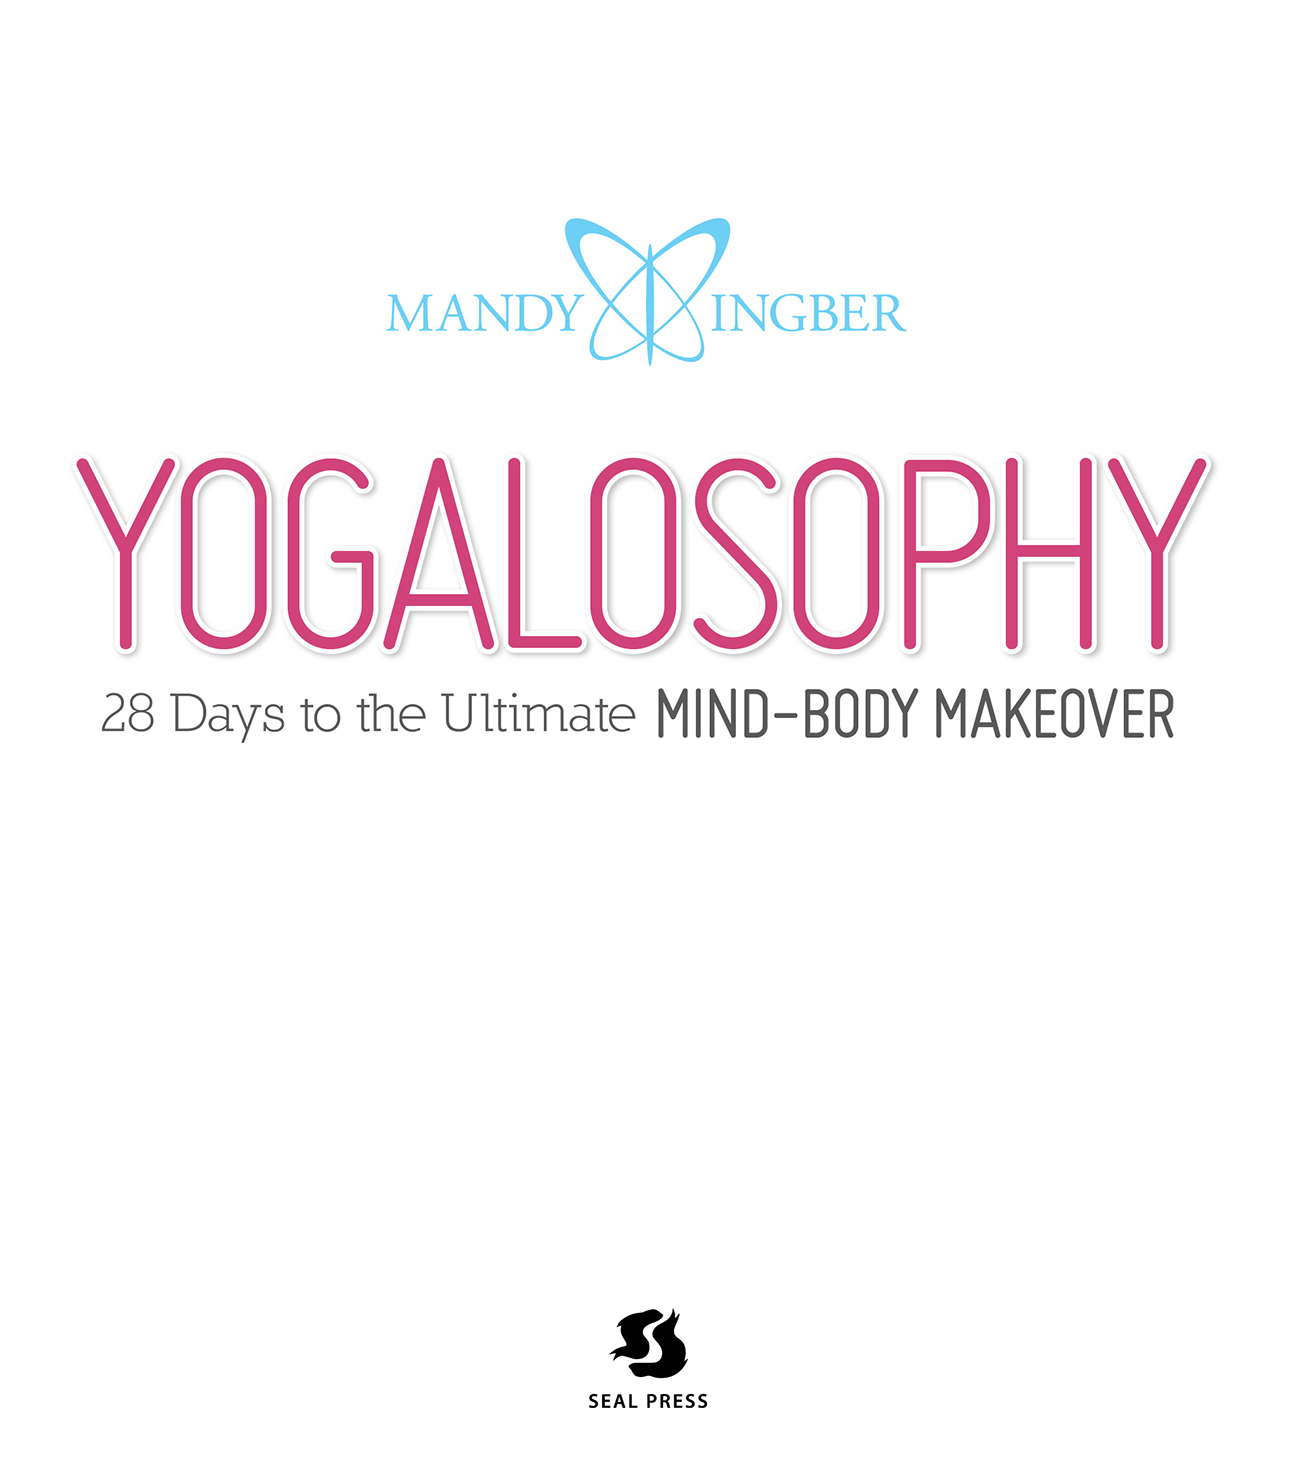 Yogalosophy 28 Days to the Ultimate Mind-Body Makeover Copyright 2013 Mandy - photo 2